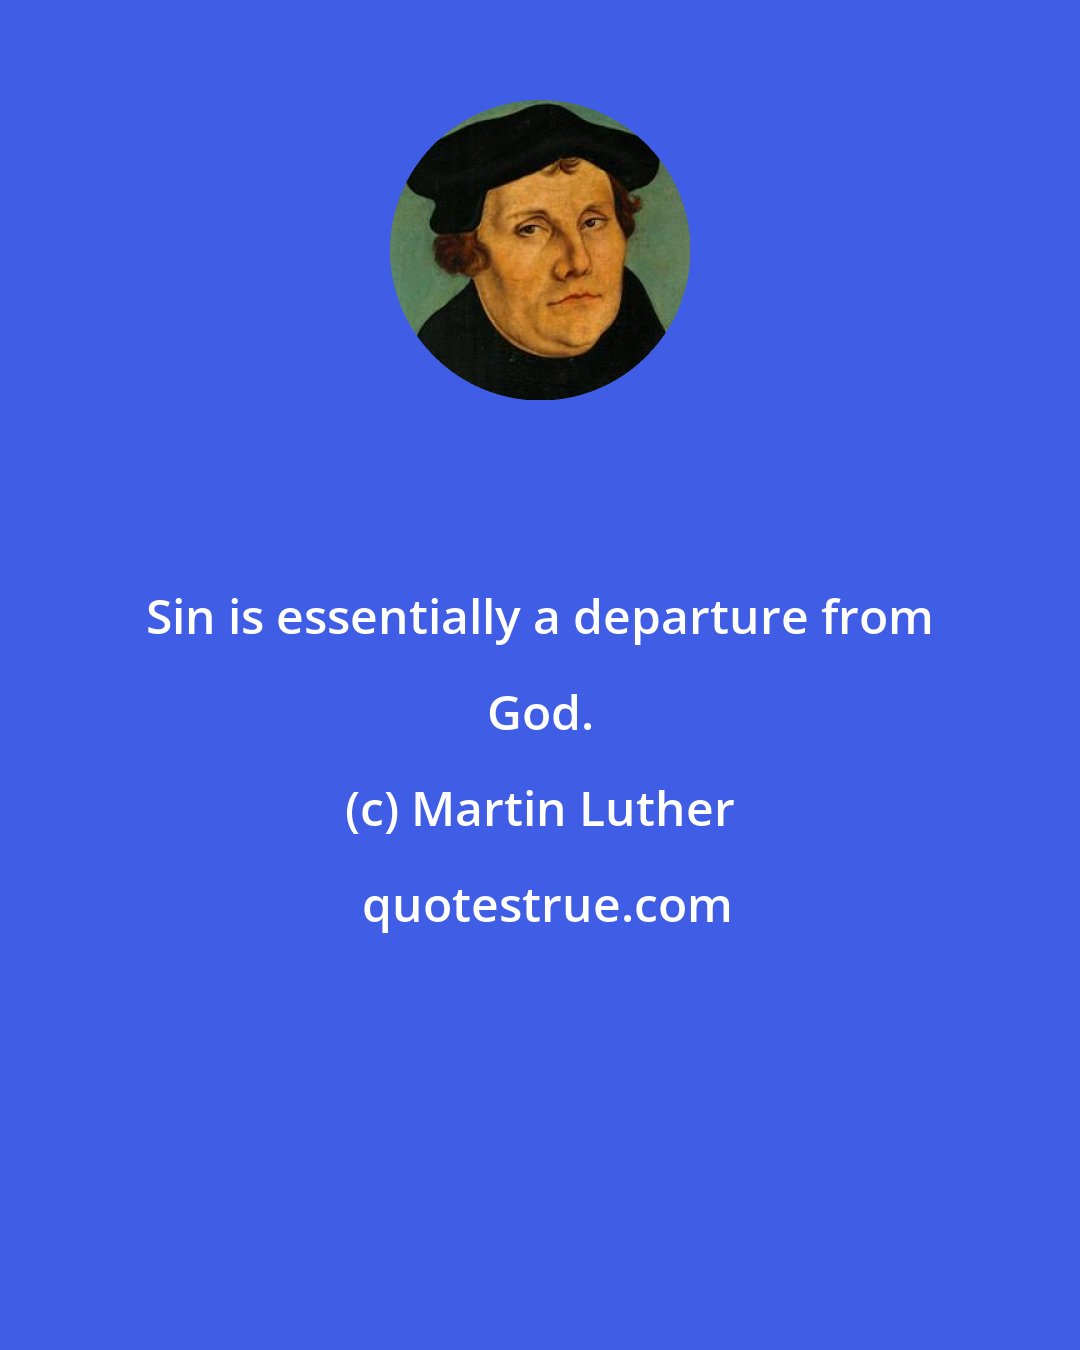 Martin Luther: Sin is essentially a departure from God.